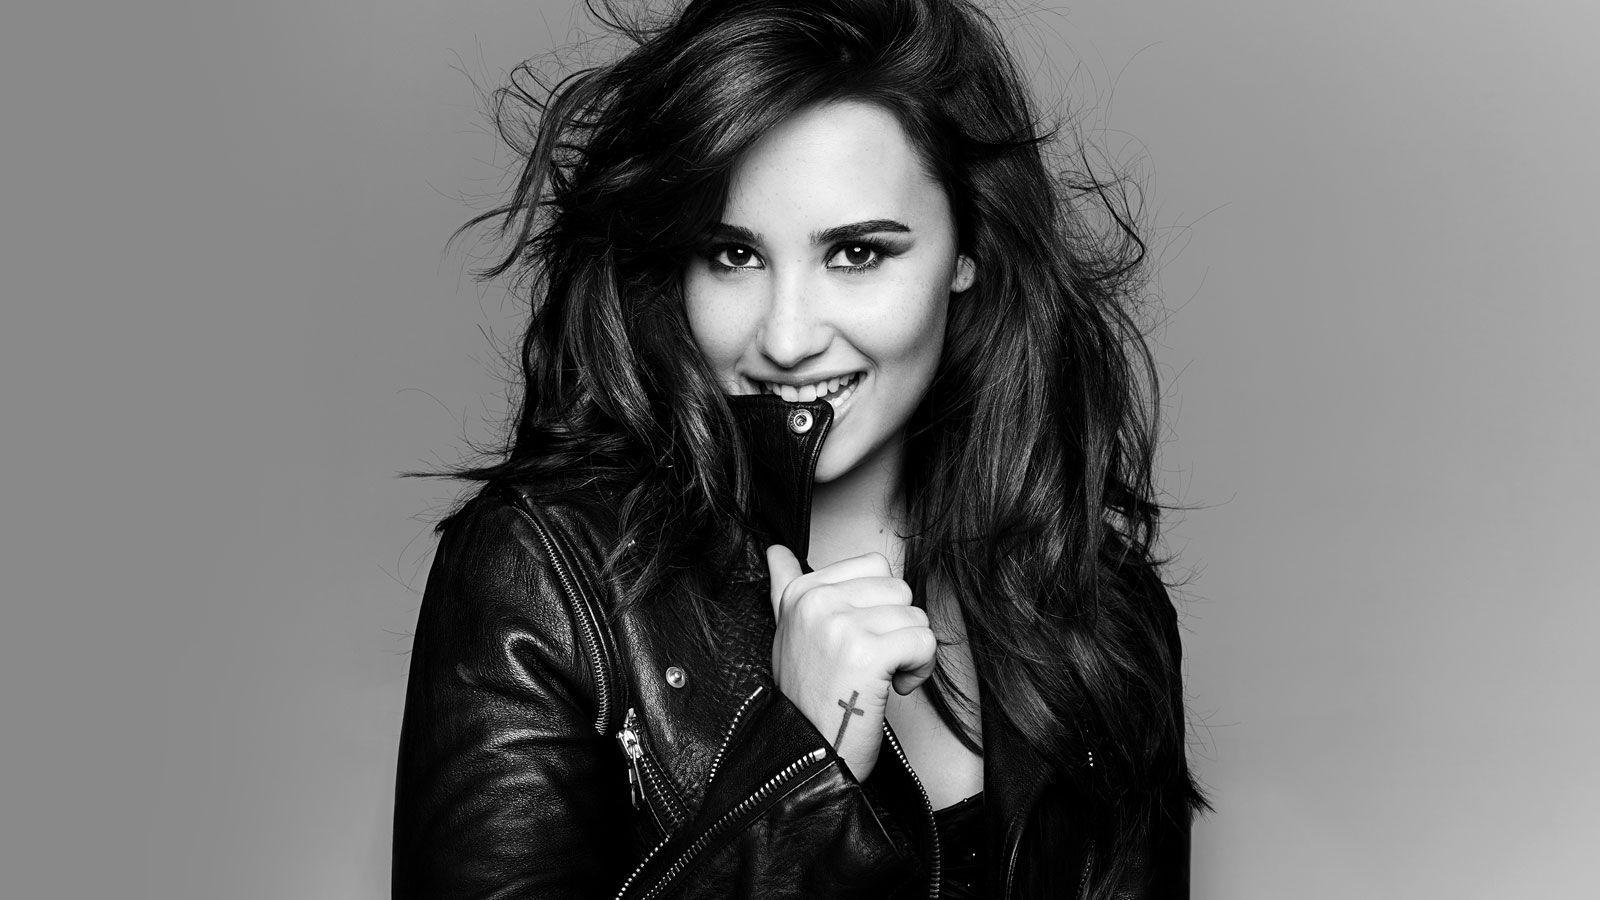 Schedule 2015 Demi Lovato Upcoming Tour, Concert, Date, Place